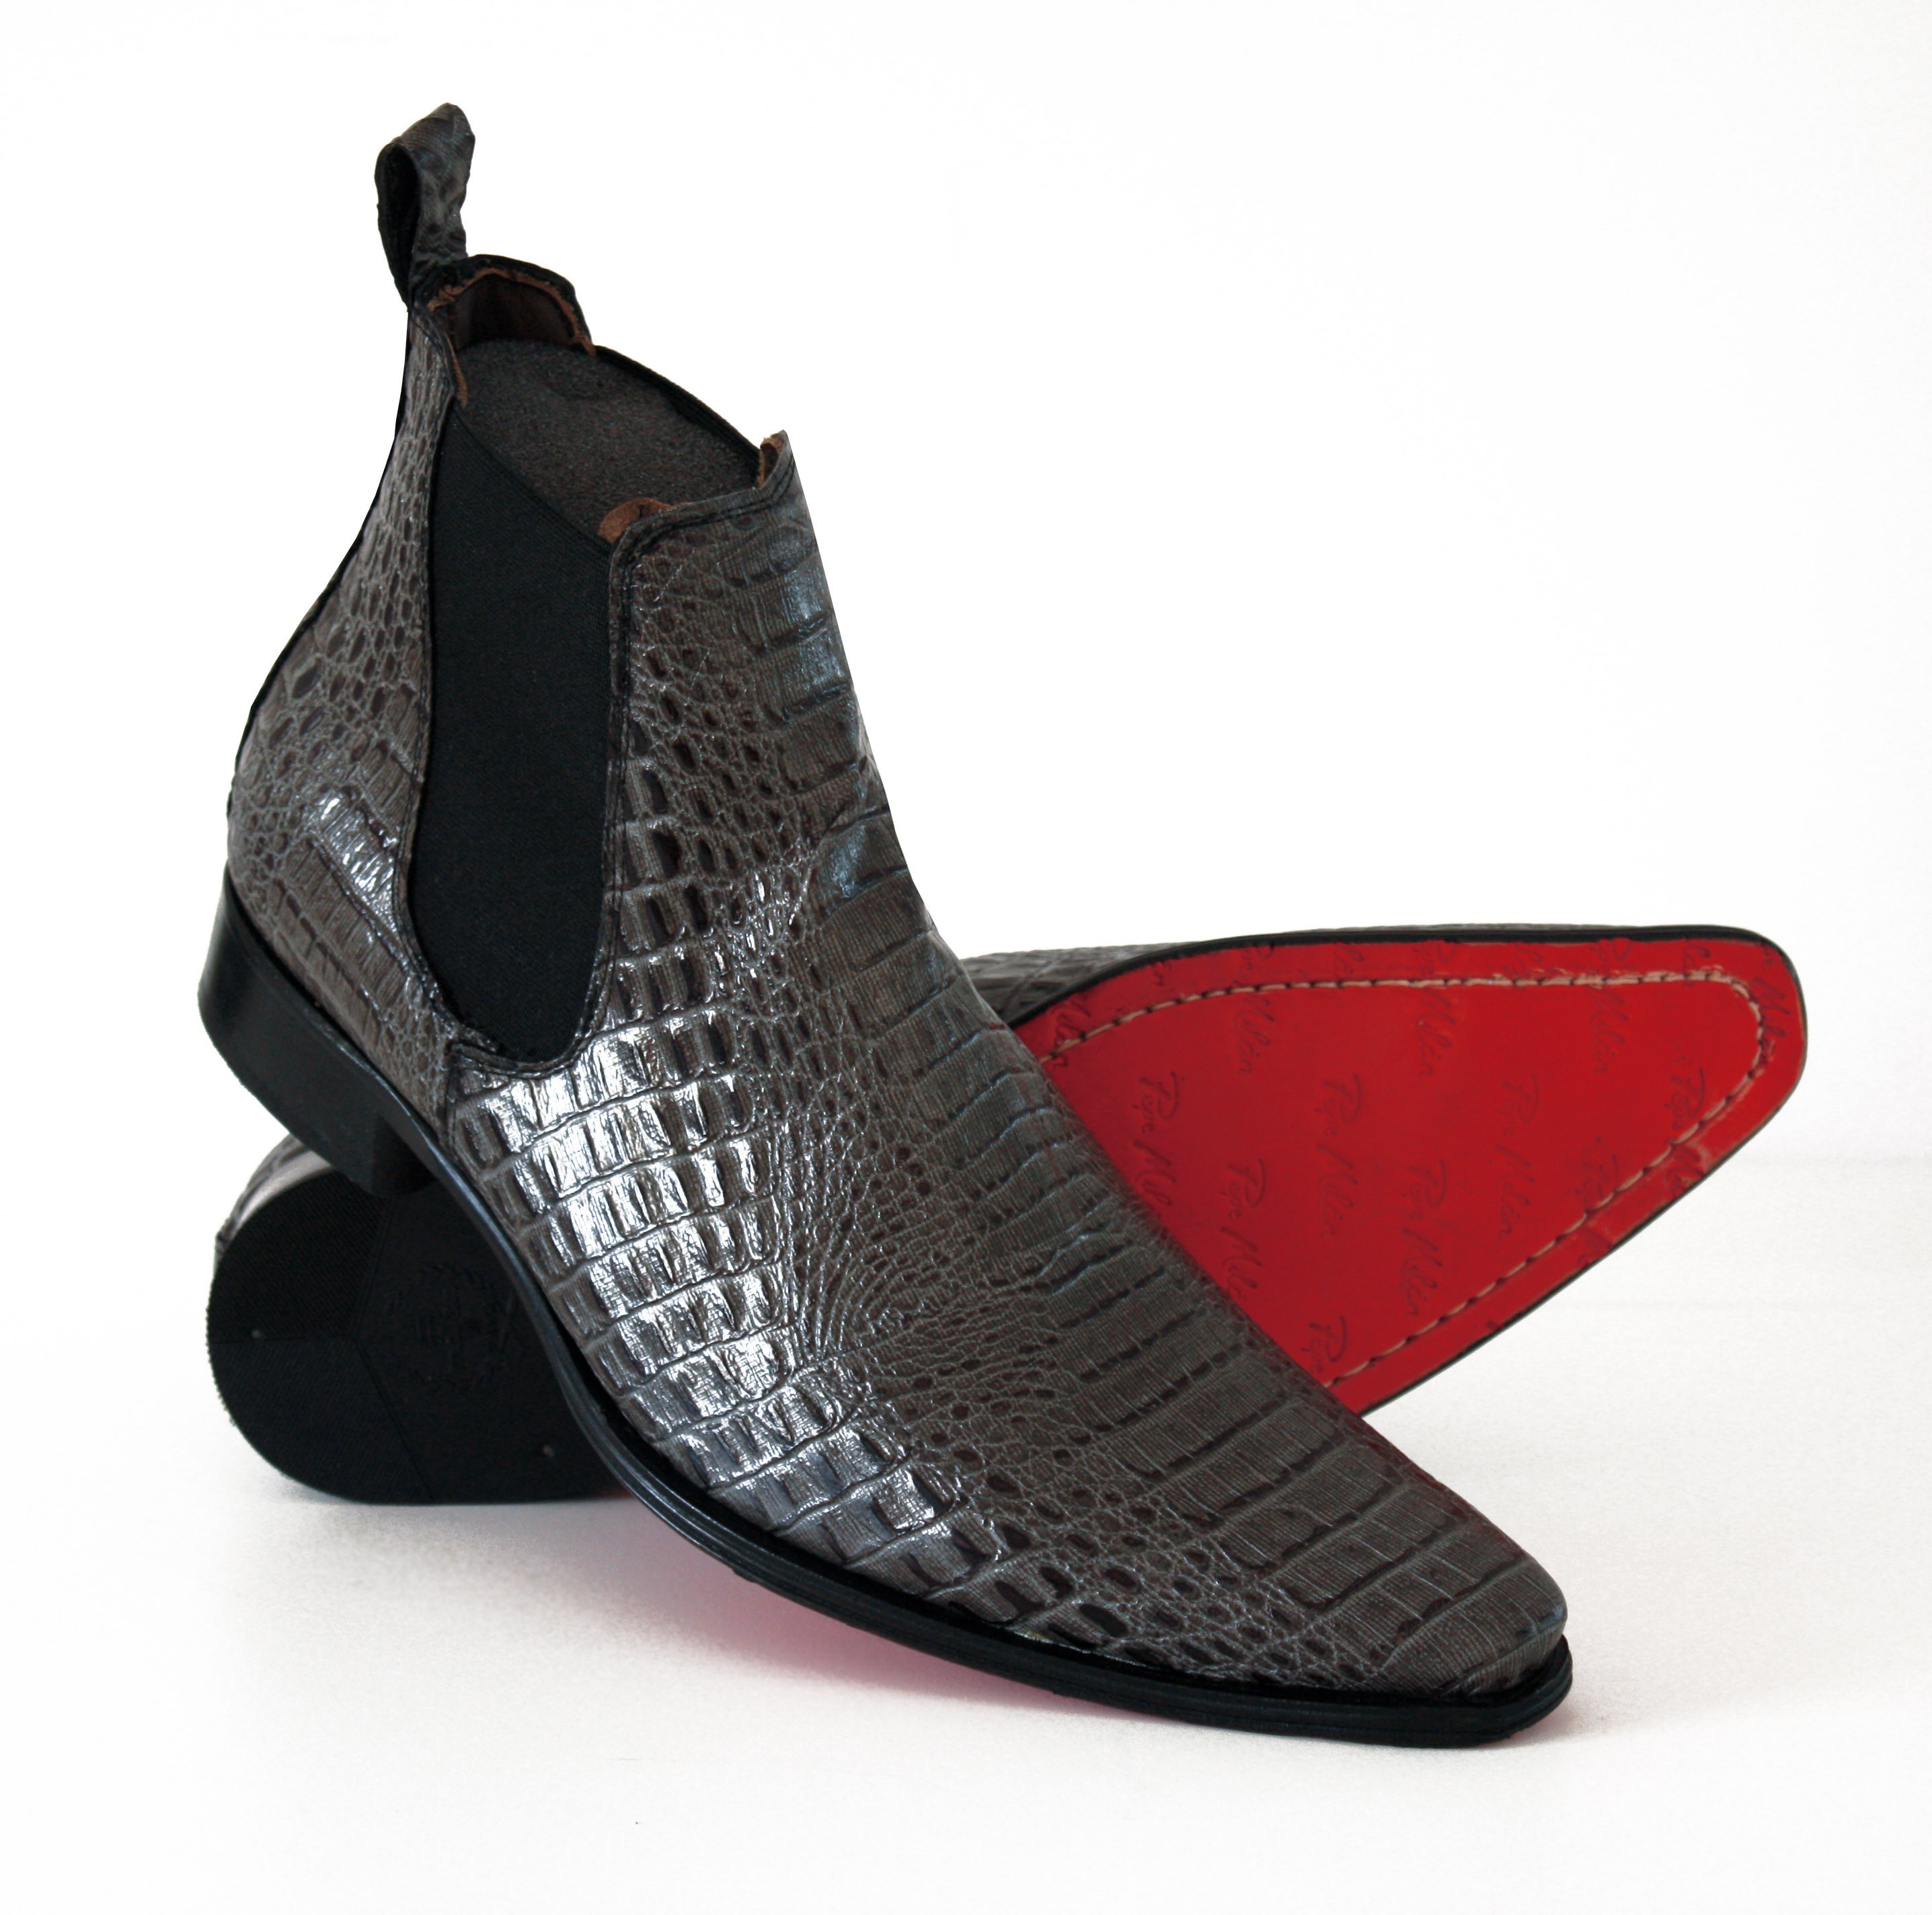 croc skin ankle boots